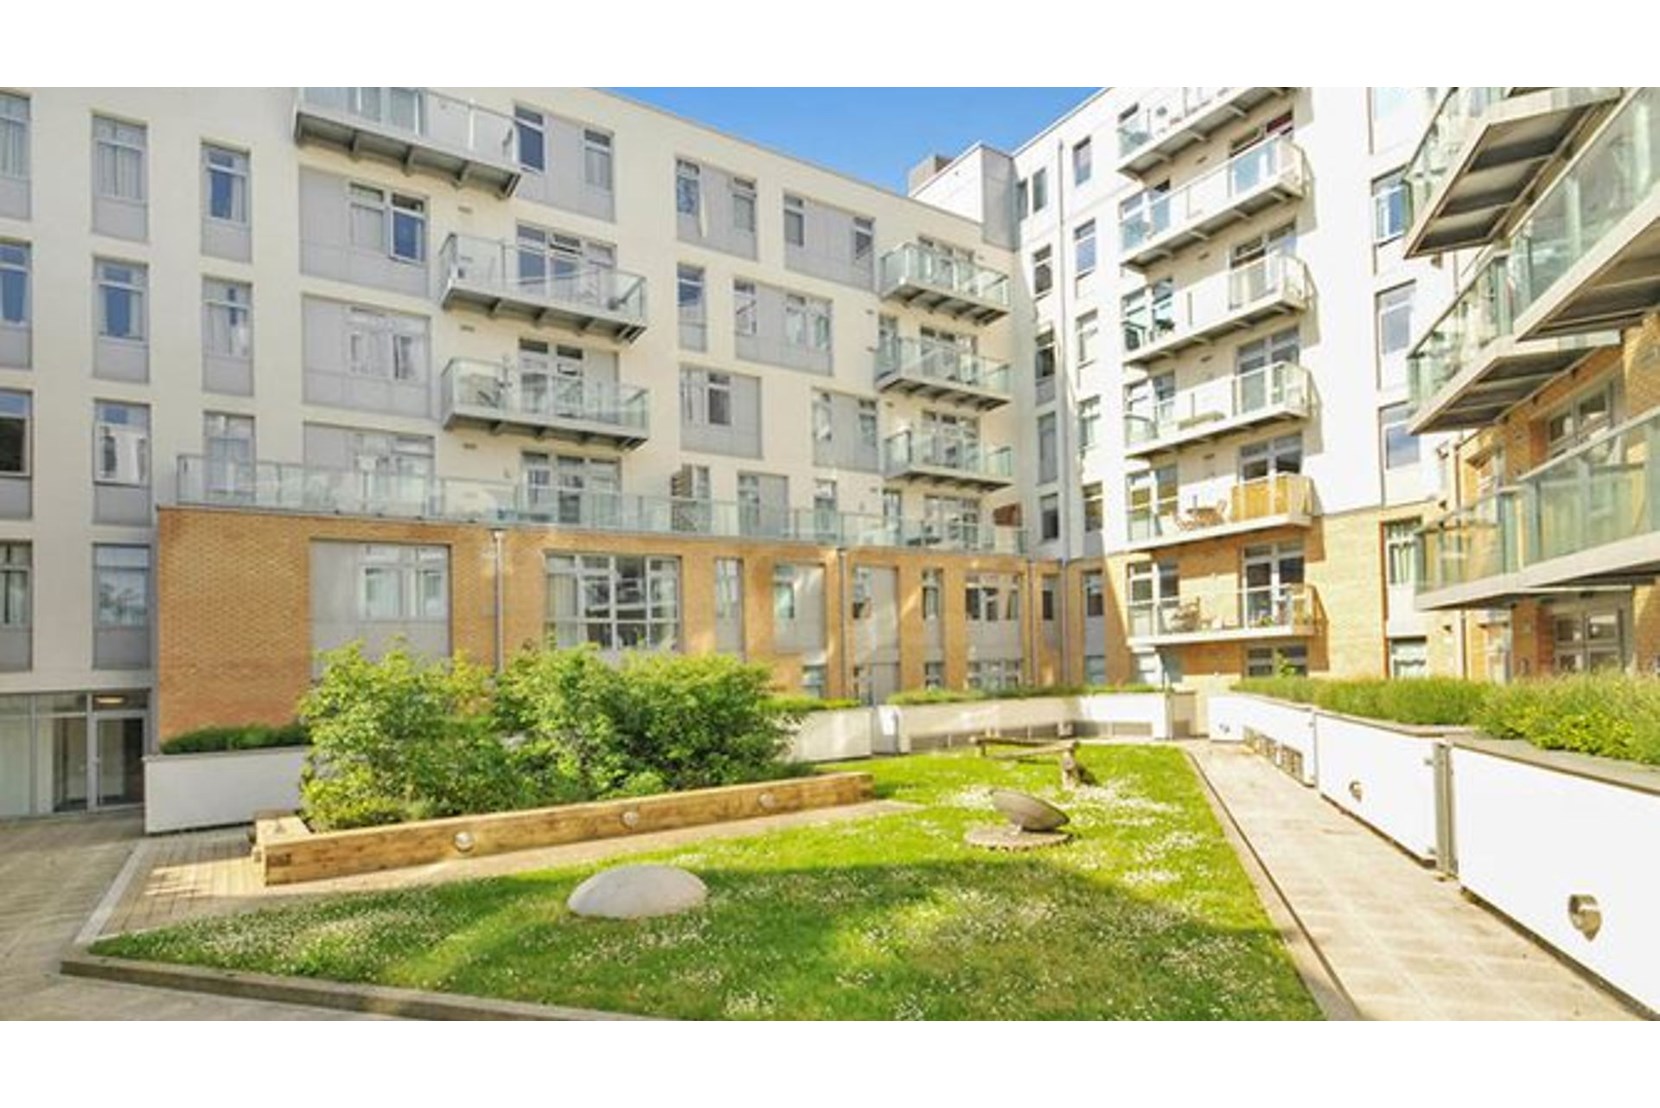 Apartments to Rent by a2dominion at Iona Tower Apartments, Tower Hamlets, E14, communal gardens